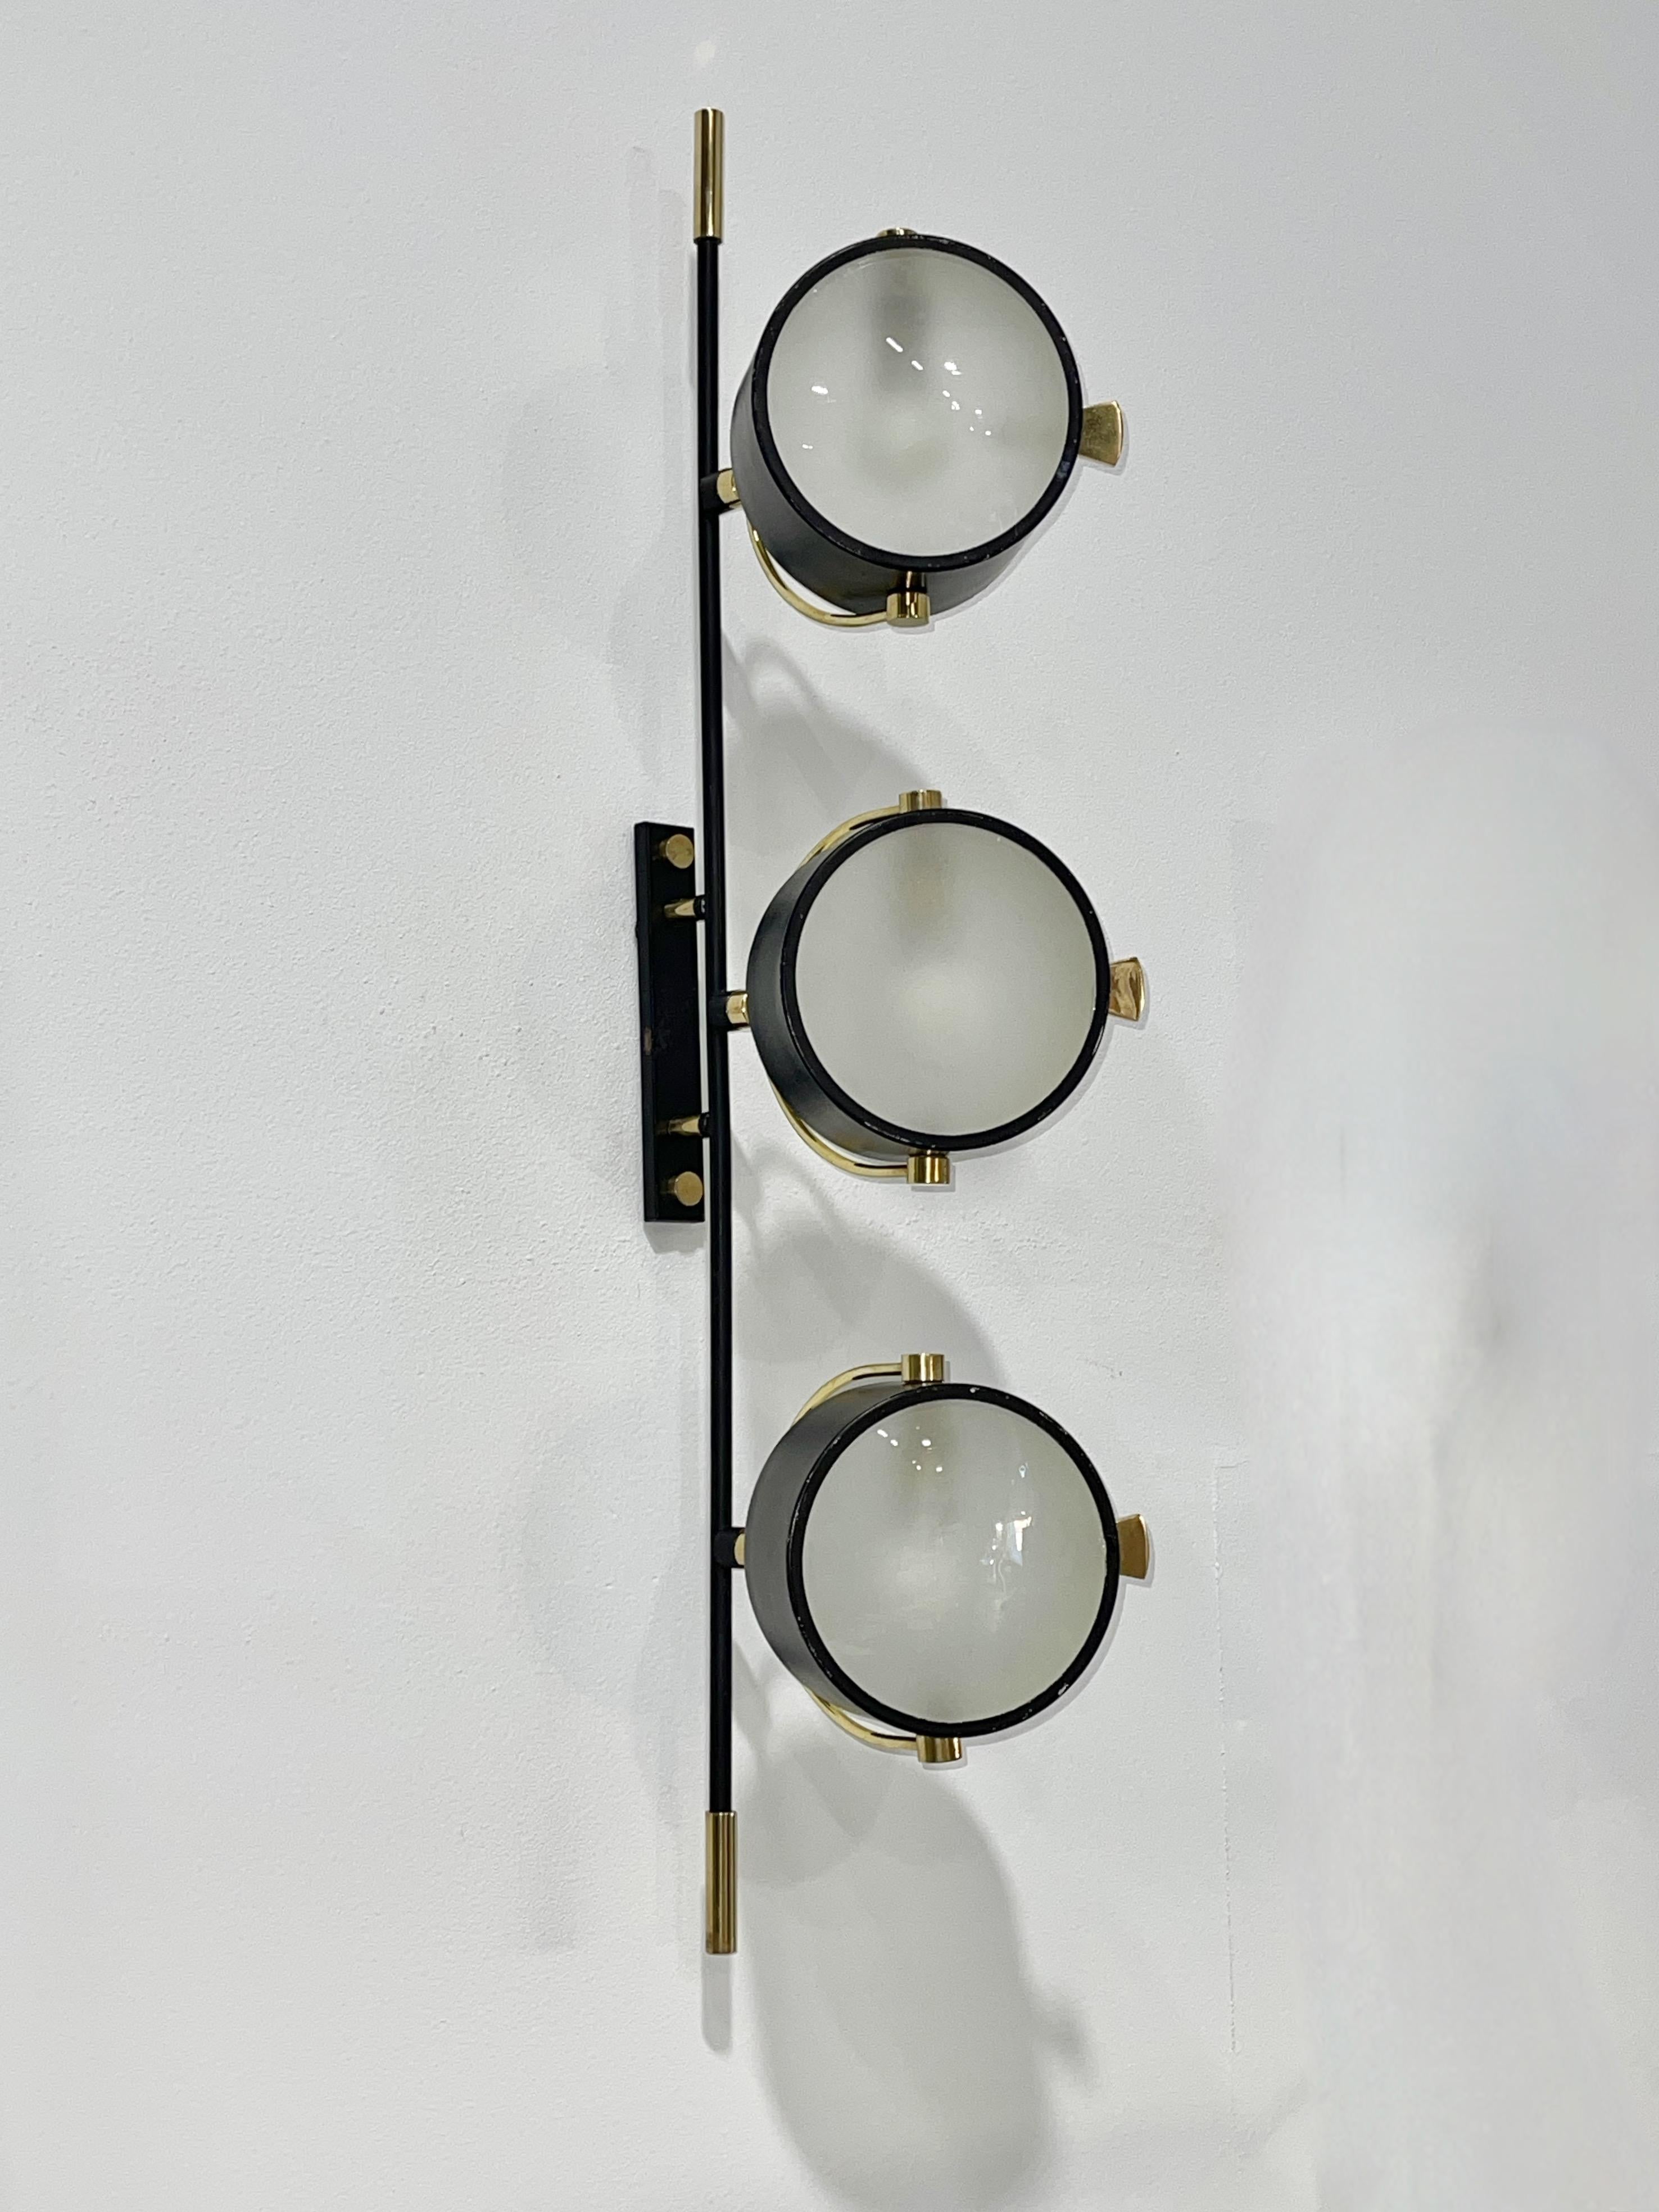 Very rare French 1950'a wall mounted fixture by Maison Lunel with three orientable circular spot reflectors with slightly convex sandblasted glass lens diffusors.  
This is part of a series offered by Lunel which included wall sconces, swing arm